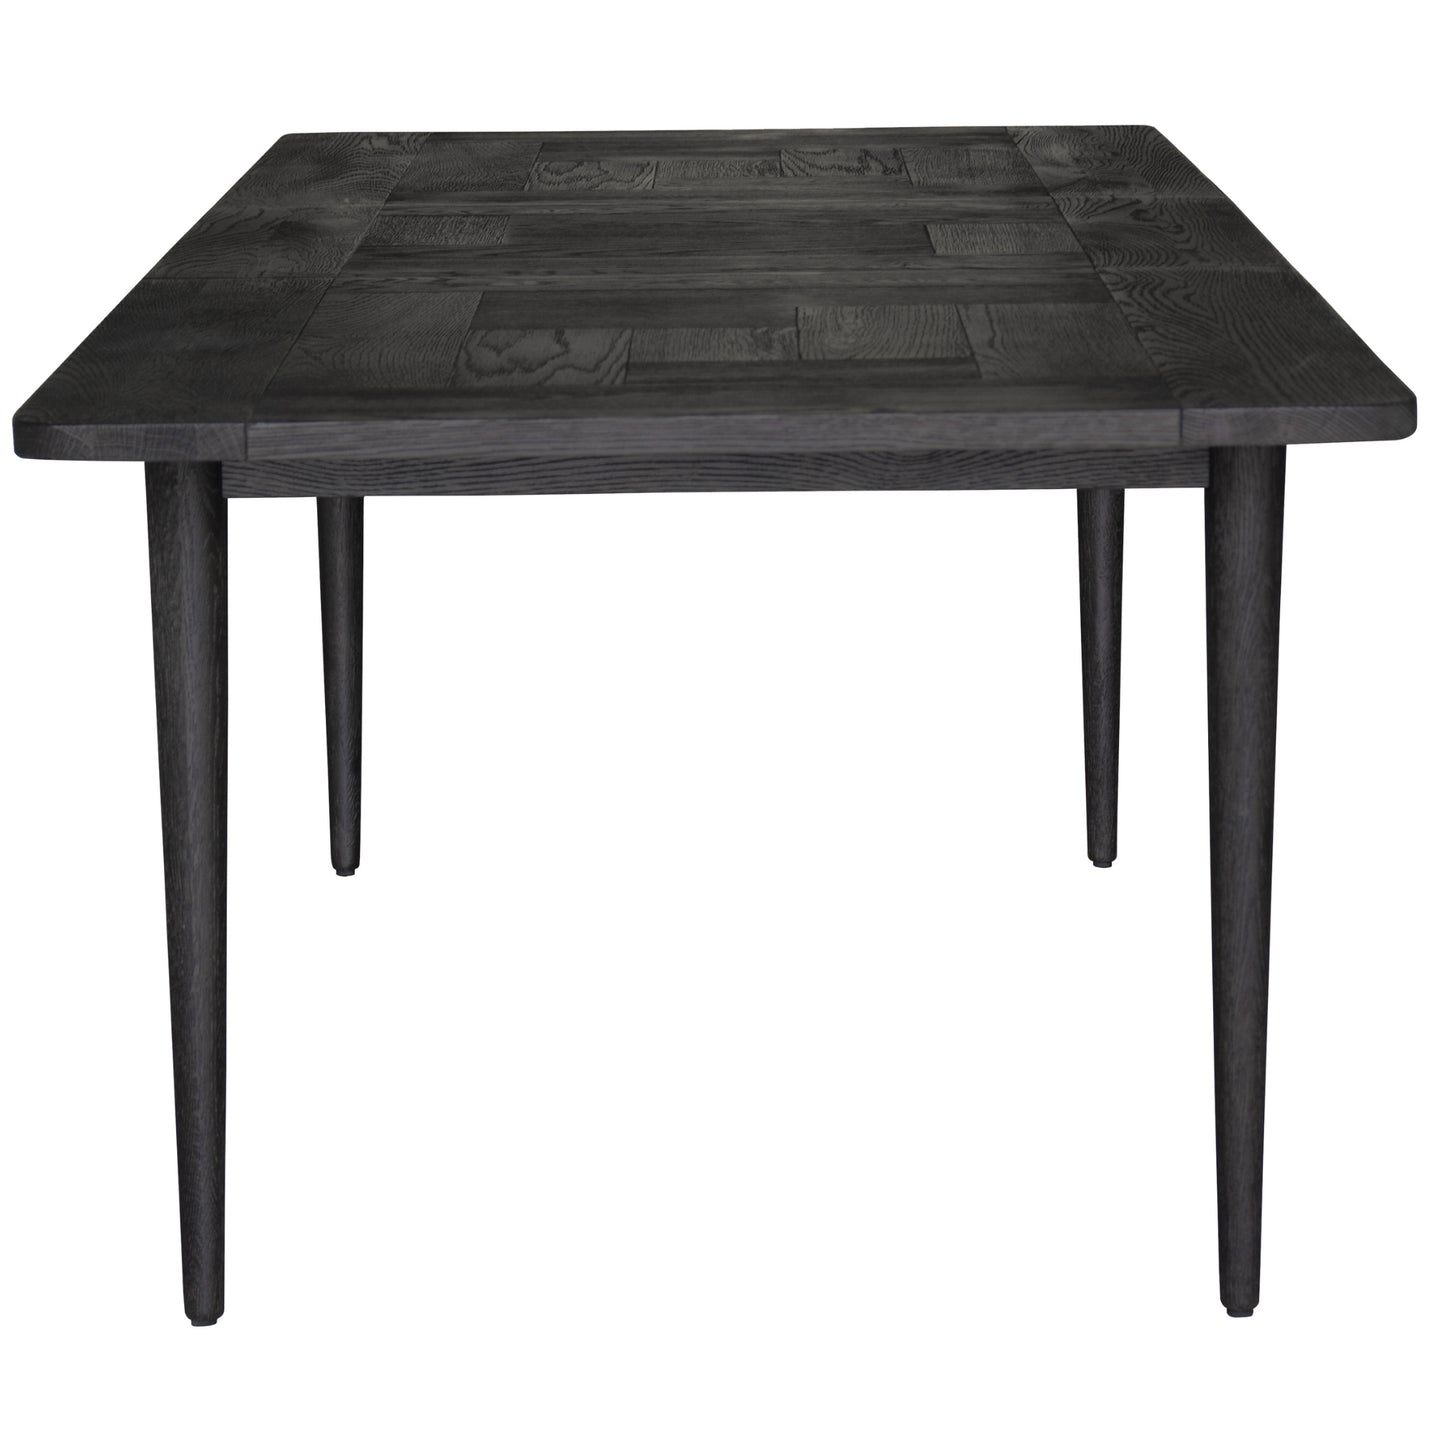 Claire Extendable 170-230cm Solid Oak Wood Dining Table - Black